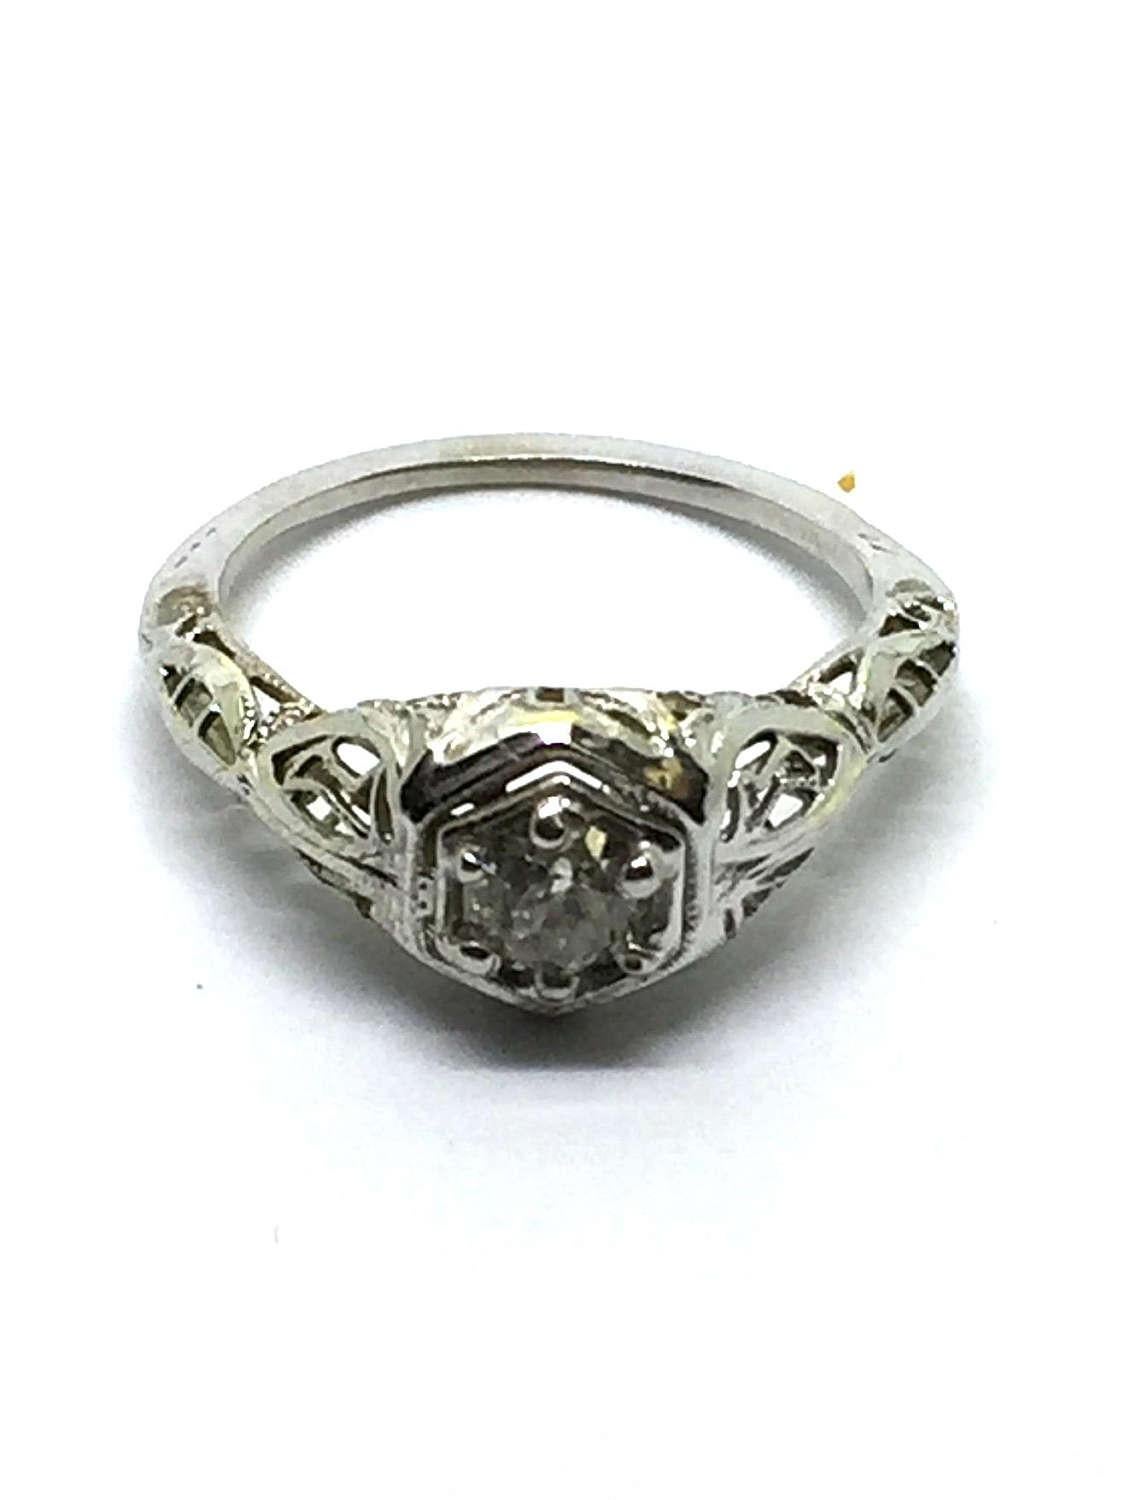 Vintage 10 Karat White Gold Diamond Engagement Ring 

This classic engagement ring features a sparkling old mine cut diamond set in exquisite white gold filigree. Approximate diamond weight: .45 ct. Diamond color: K Diamond clarity: VS2 

Ring Size: